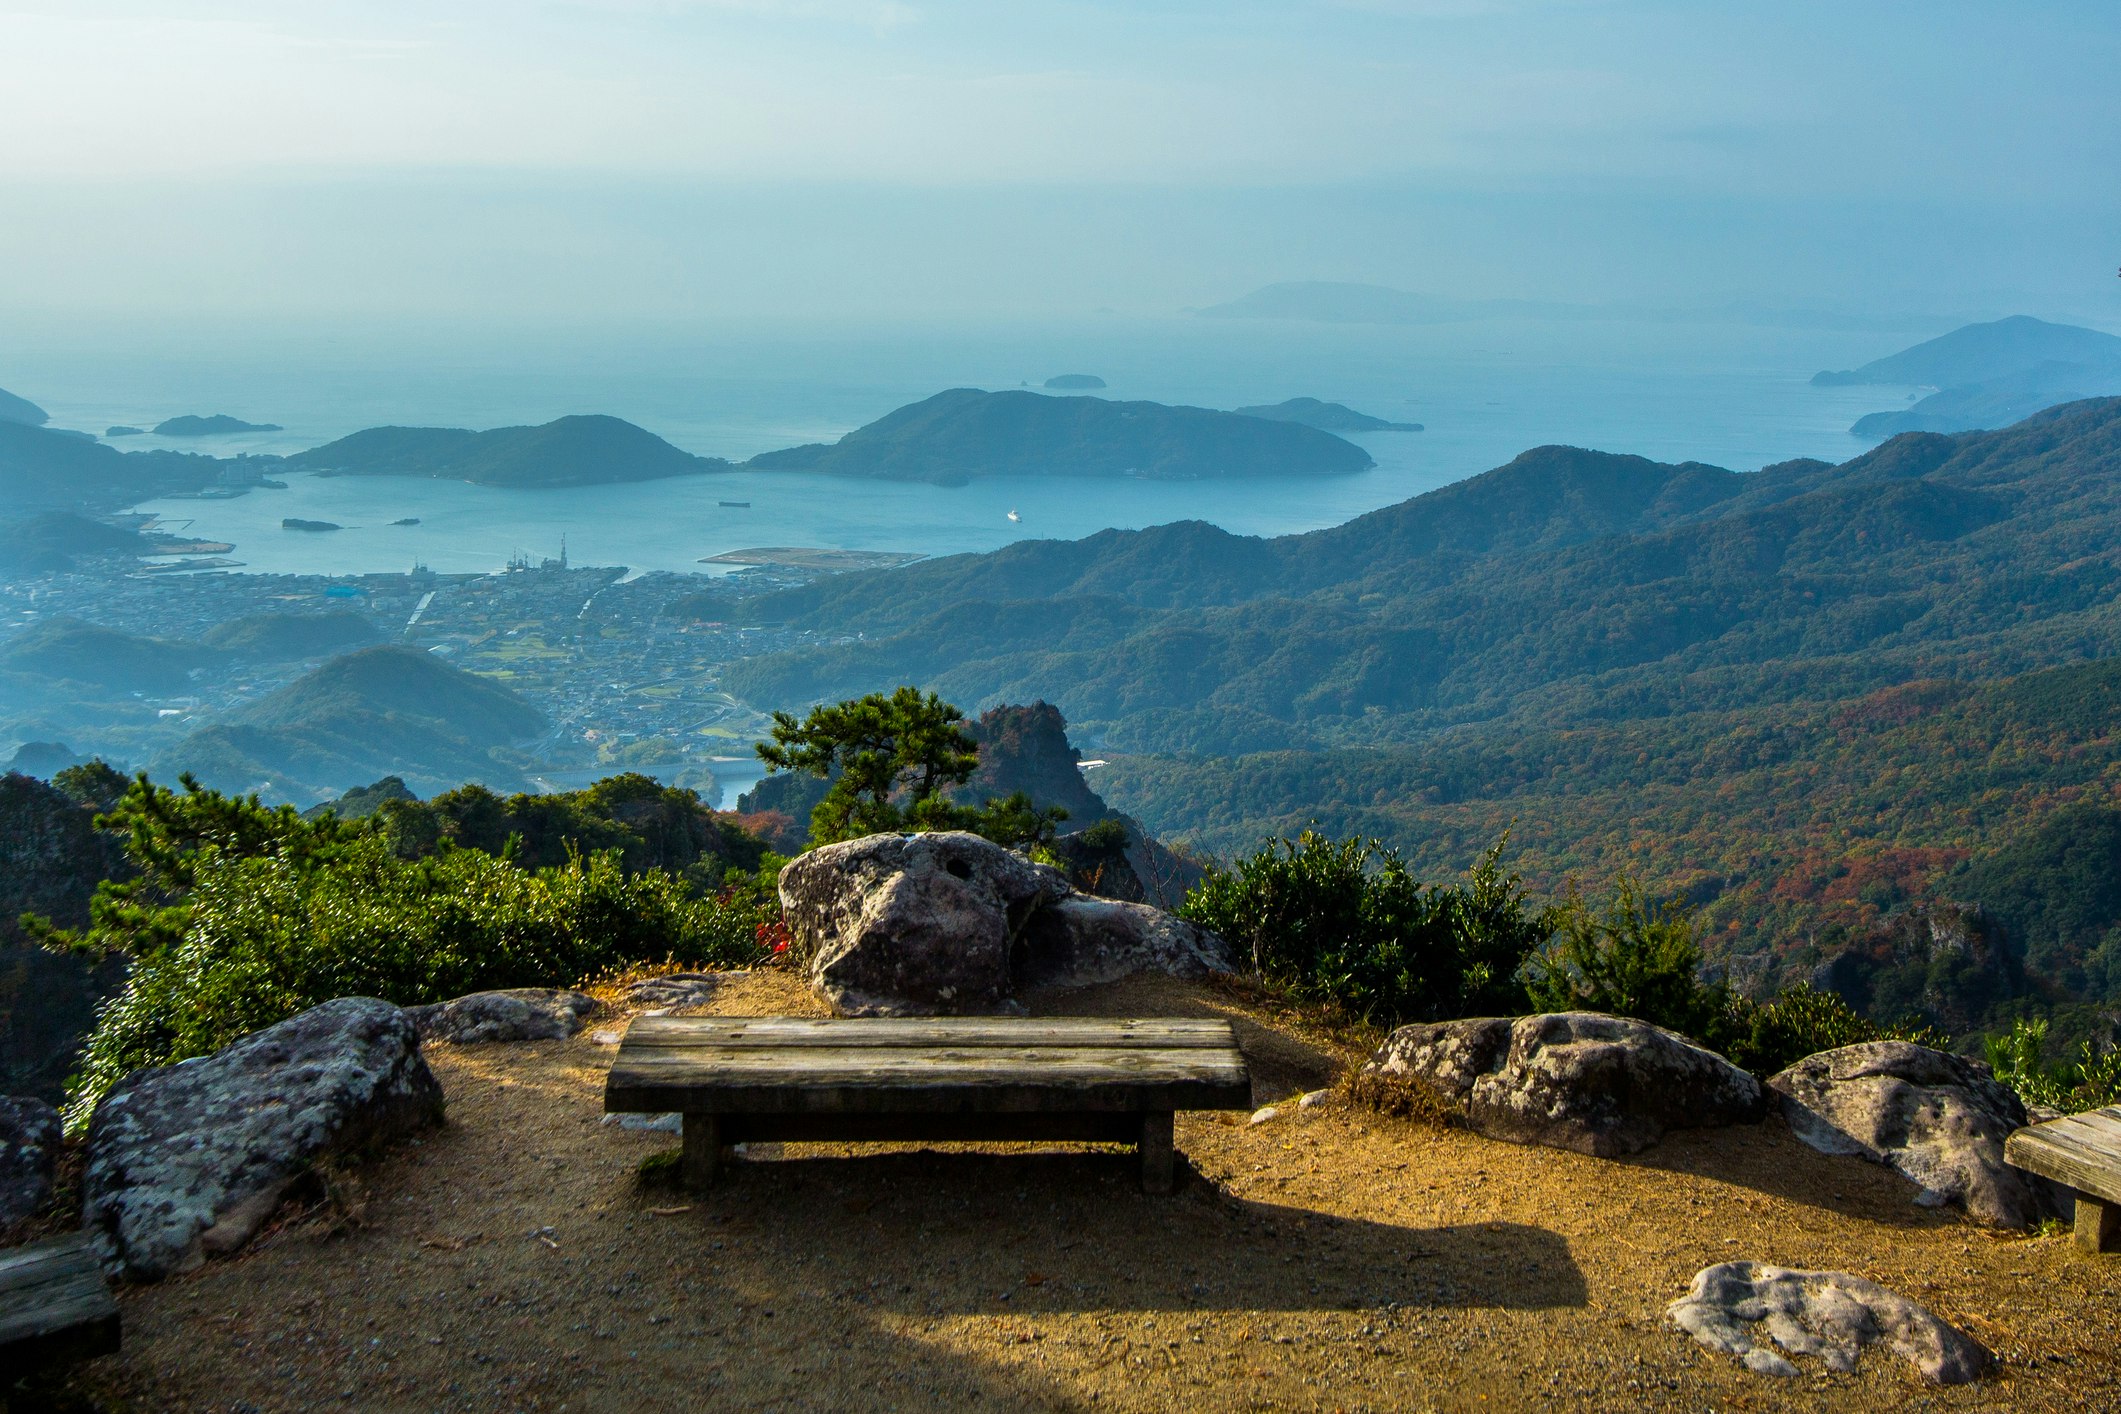 A low wooden bench sits empty on an overlook with stellar views of the Kankakei gorge. In the distance, low islands rise out of the denim-colored sea, which blends into the hazy sky